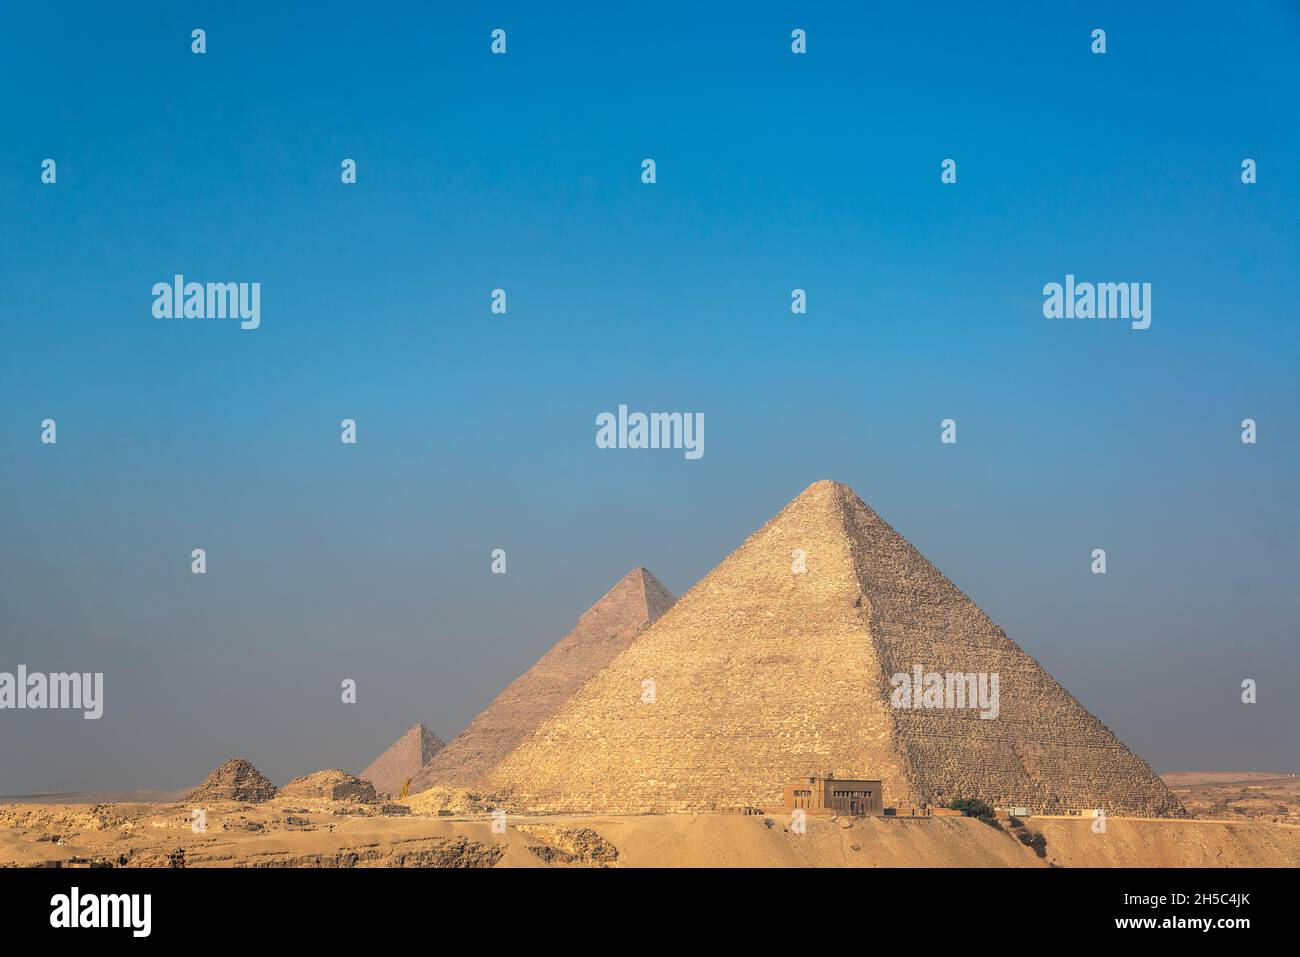 Amazing view of the Pyramids of Giza in Egypt Stock Photo